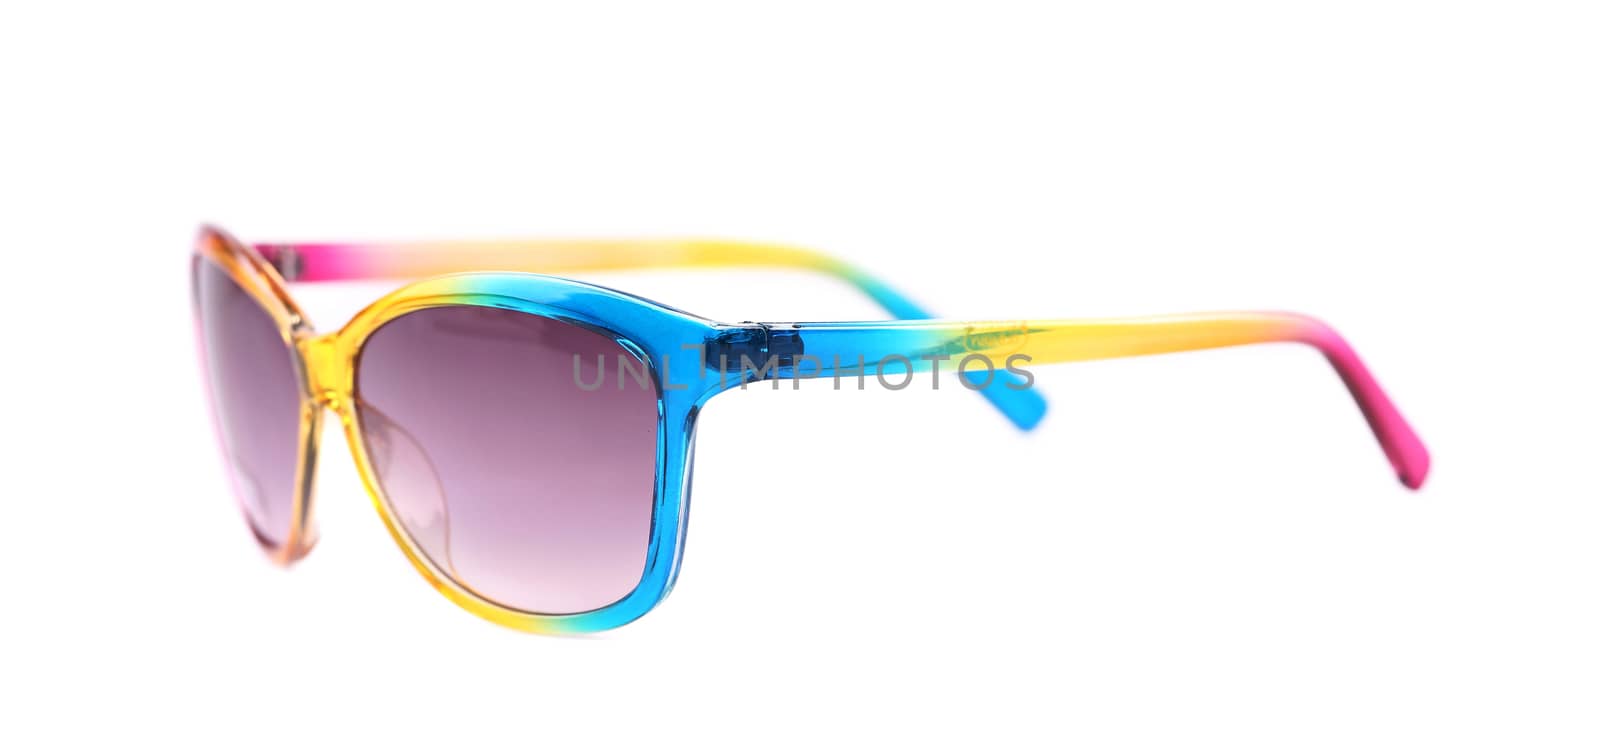 Colorful sun glasses. by indigolotos